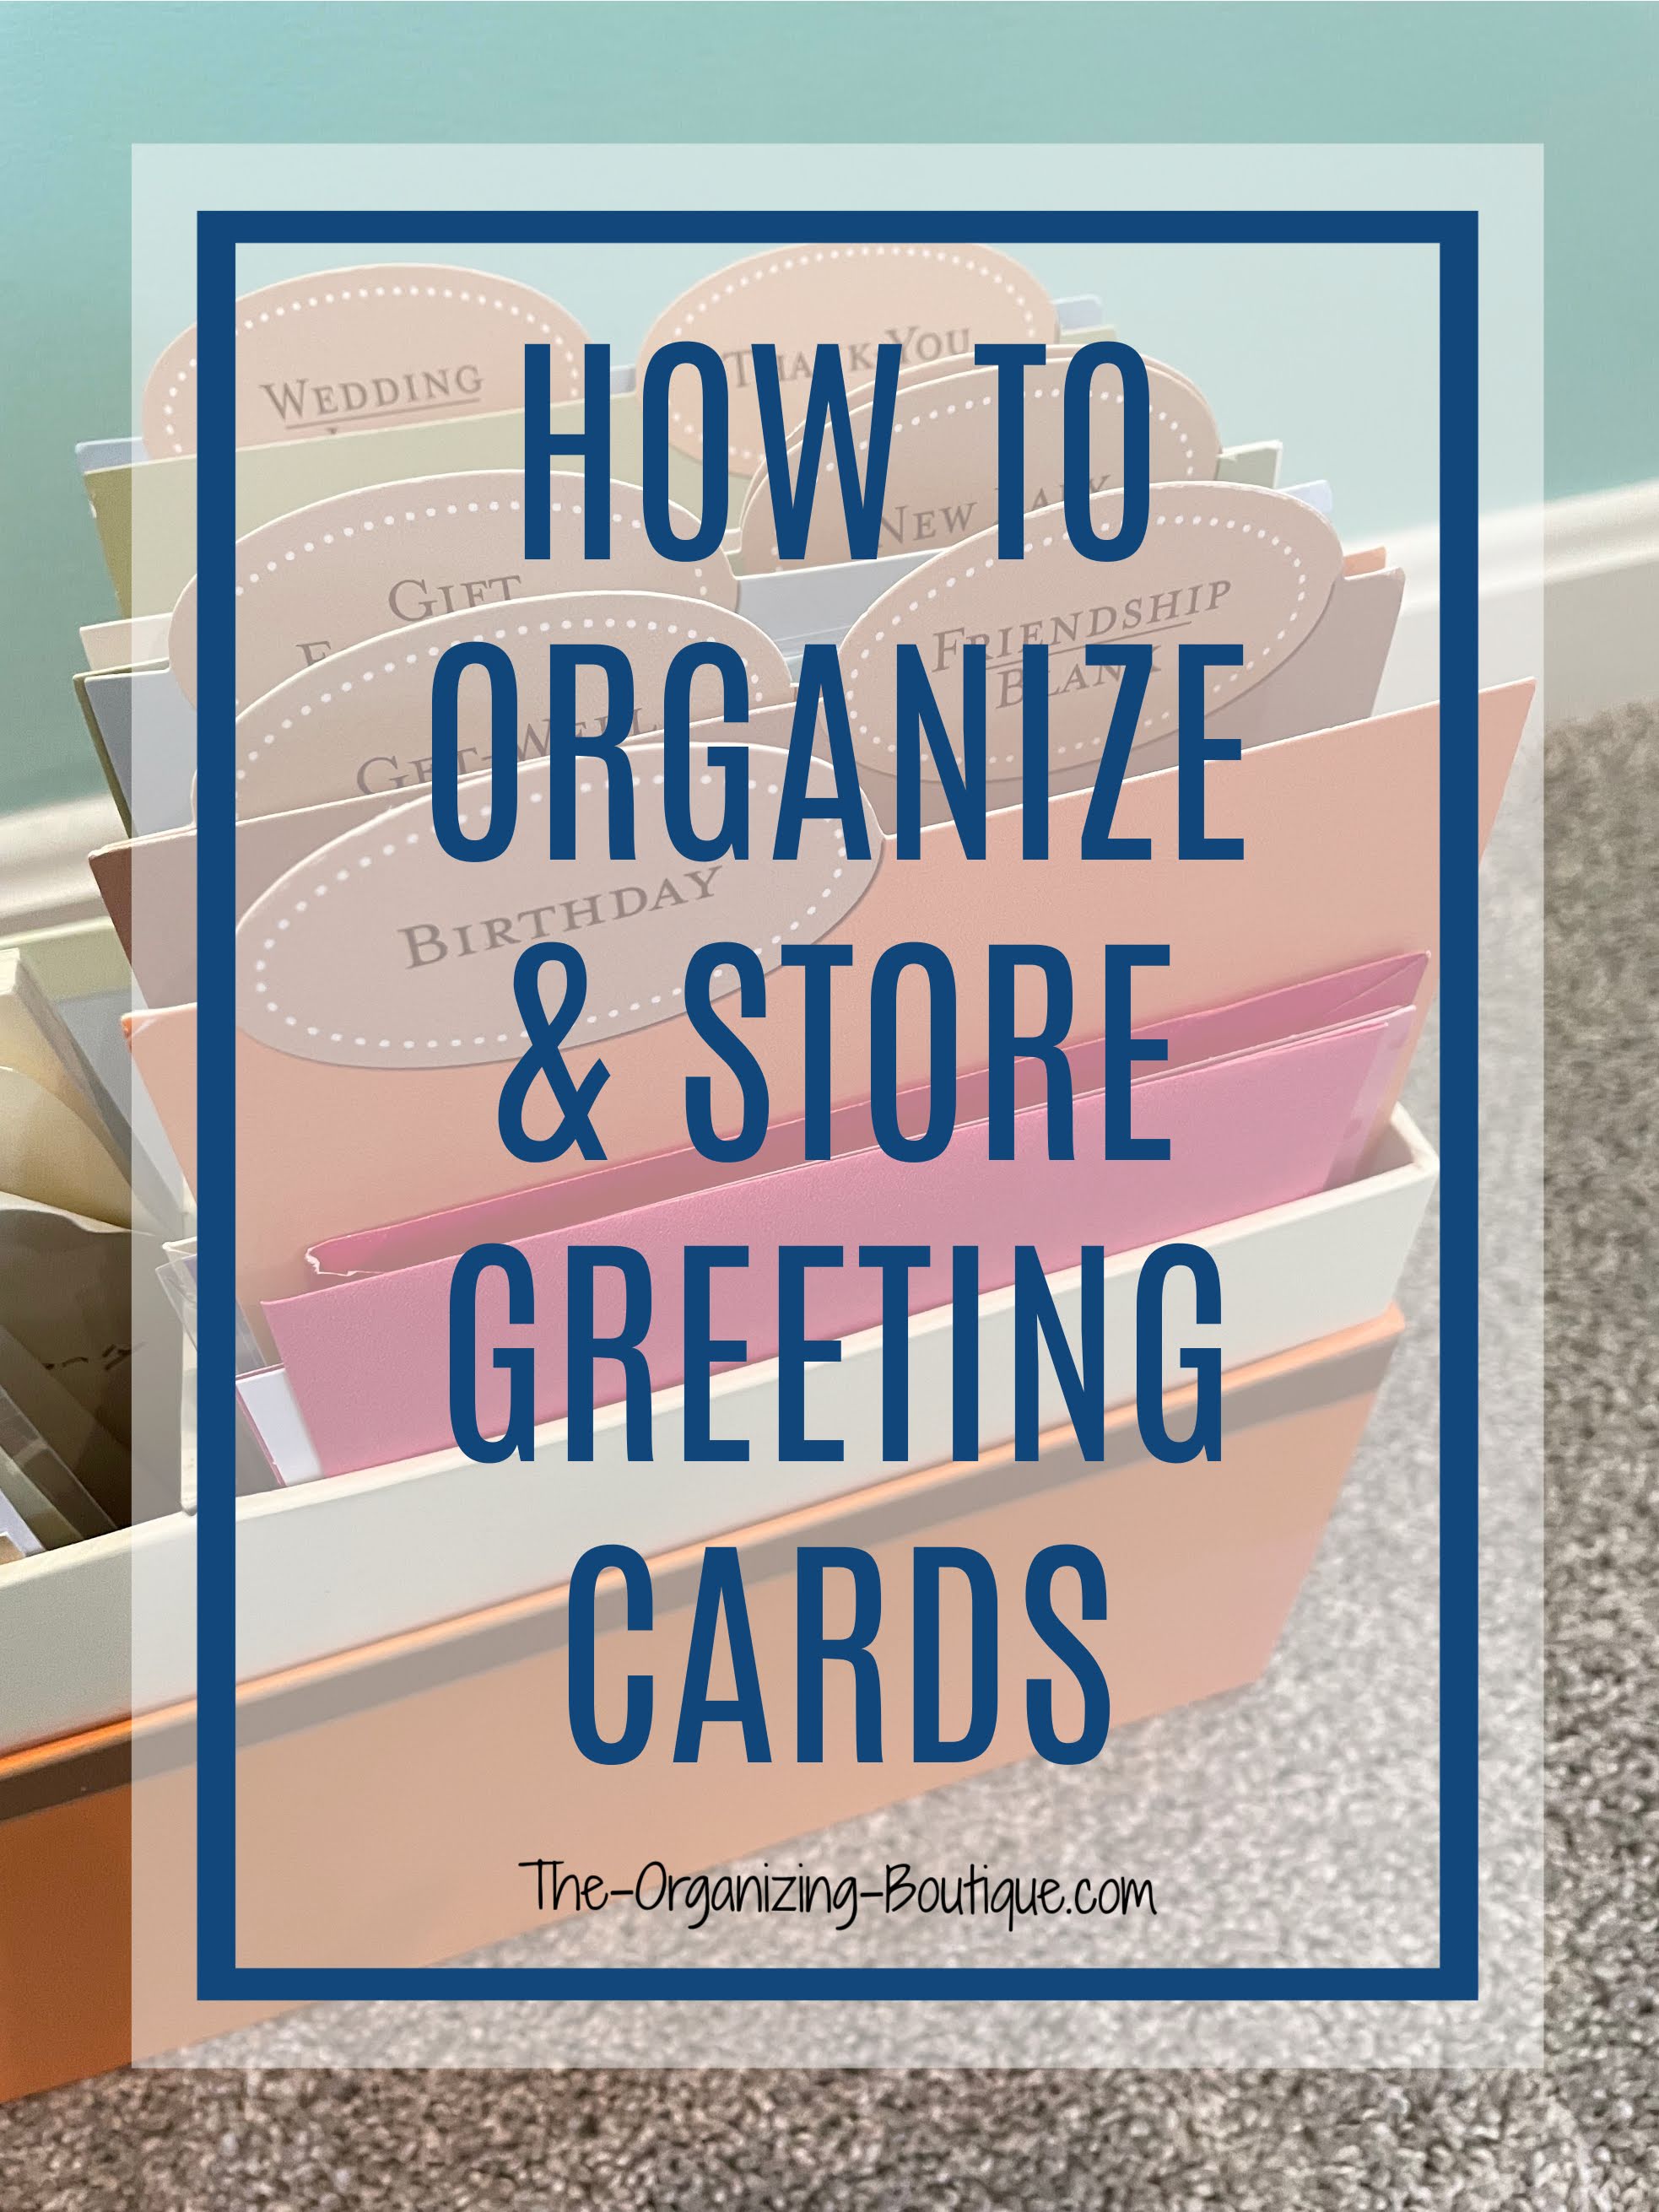 Looking for greeting card storage ideas? Here's the organizing process, awesome greeting card organizer products, upcycling ideas and more!